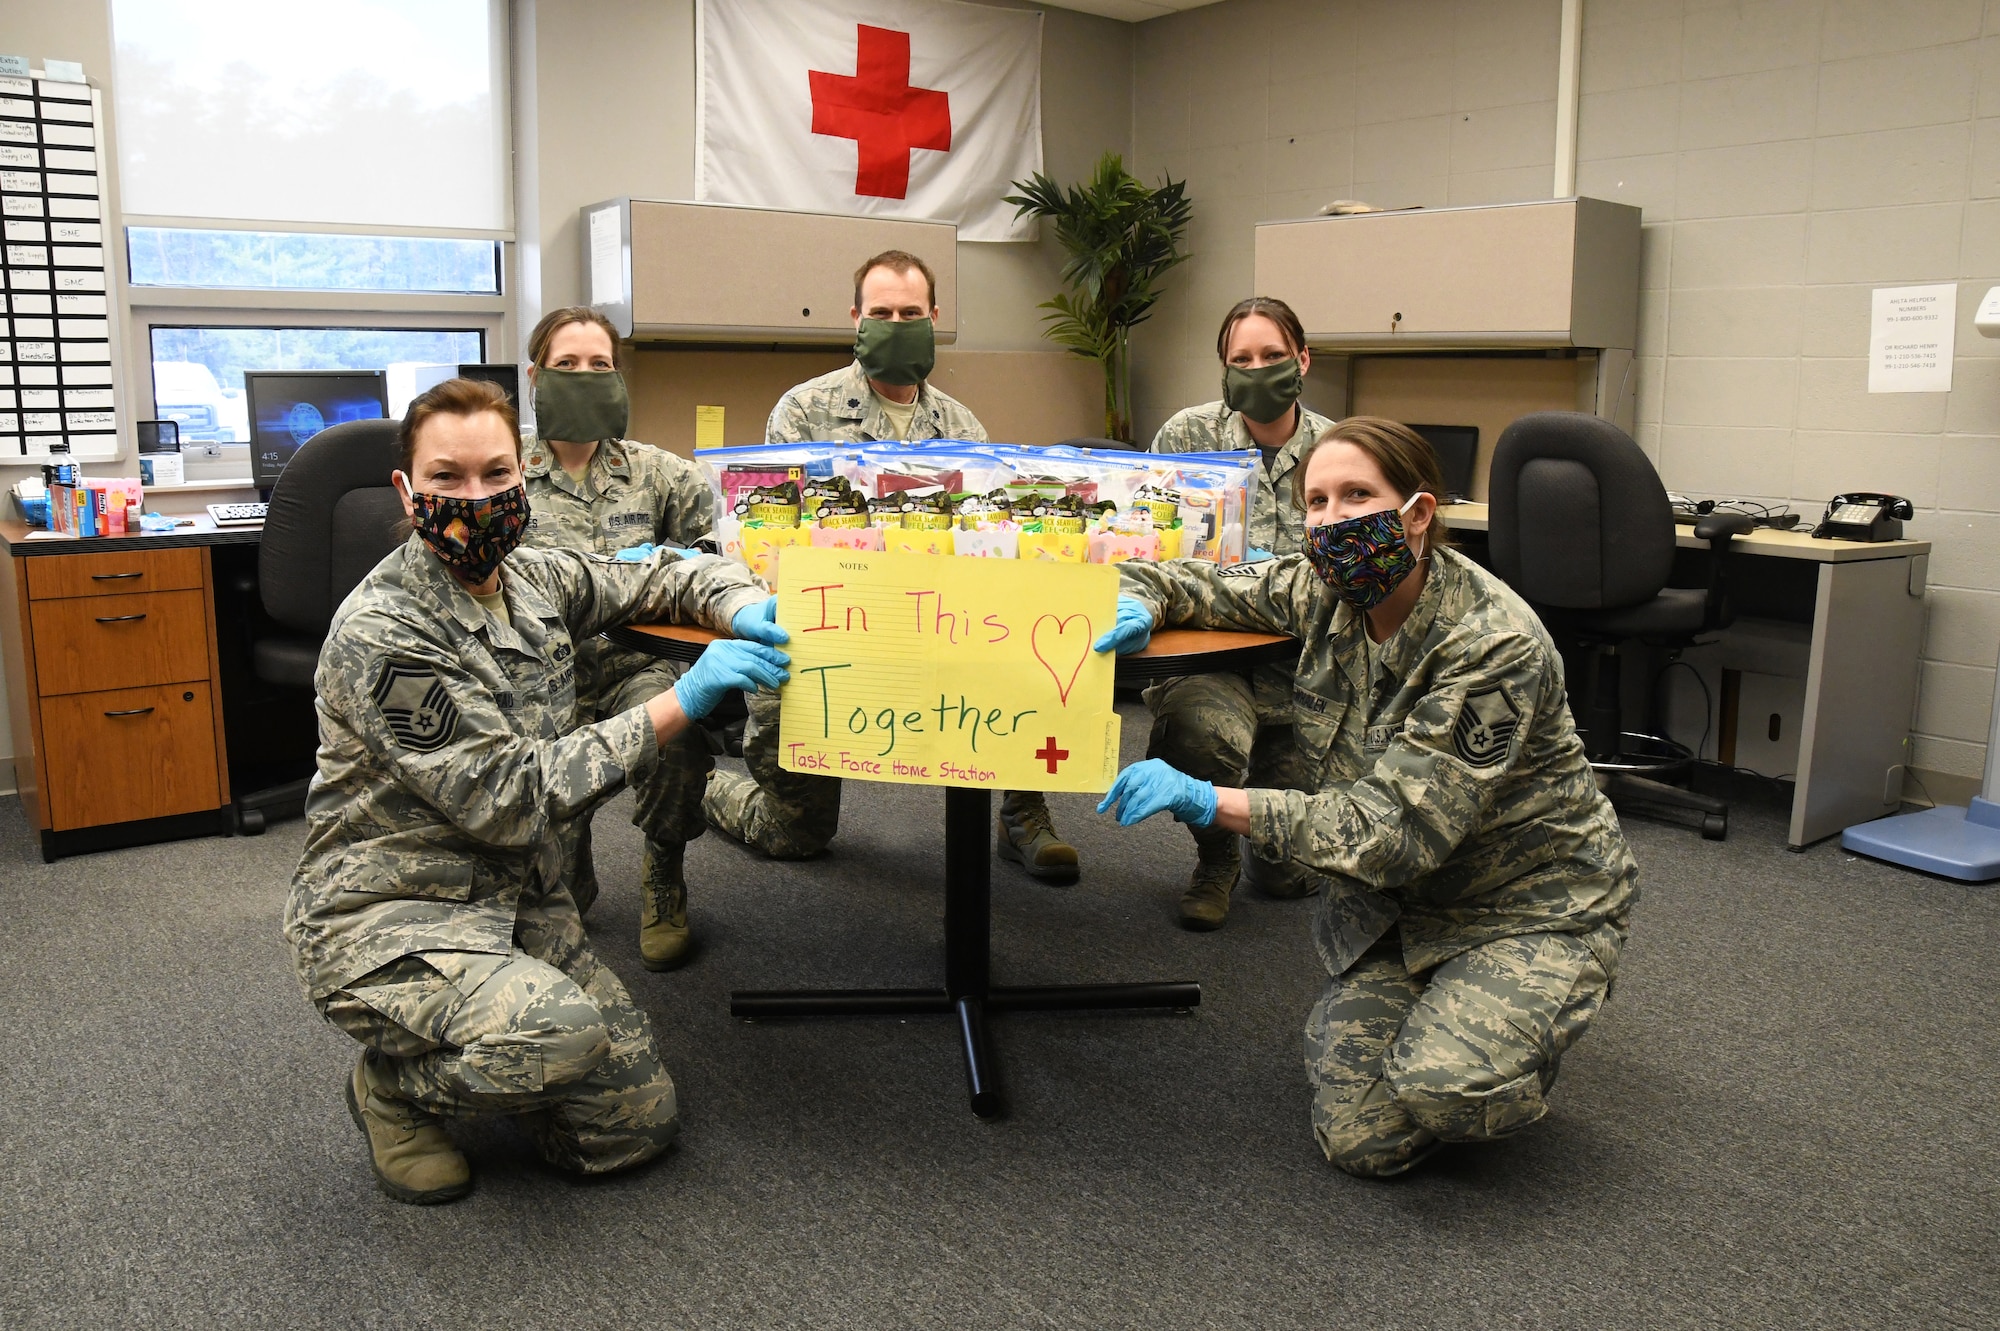 Members of the 104th Fighter Wing Medical Group and Public Health office prepare Easter treats for their wingmen, aerospace medical technicians serving at COVID-19 testing sites and helping backfill staff at facilities throughout Massachusetts. The home station team will deliver the treats for Airmen at their staging area to find as a surprise on Easter. Pictured from left to right: SMSgt Karla Belliveau, Maj. Barbara Jones, Lt. Col. Stephen Burgess, Master Sgt. Christine Lupacchino and Master Sgt. Kylie Burns-Whalen. (U.S. Air National Guard Photo by Senior Master Sgt. Julie Avey)